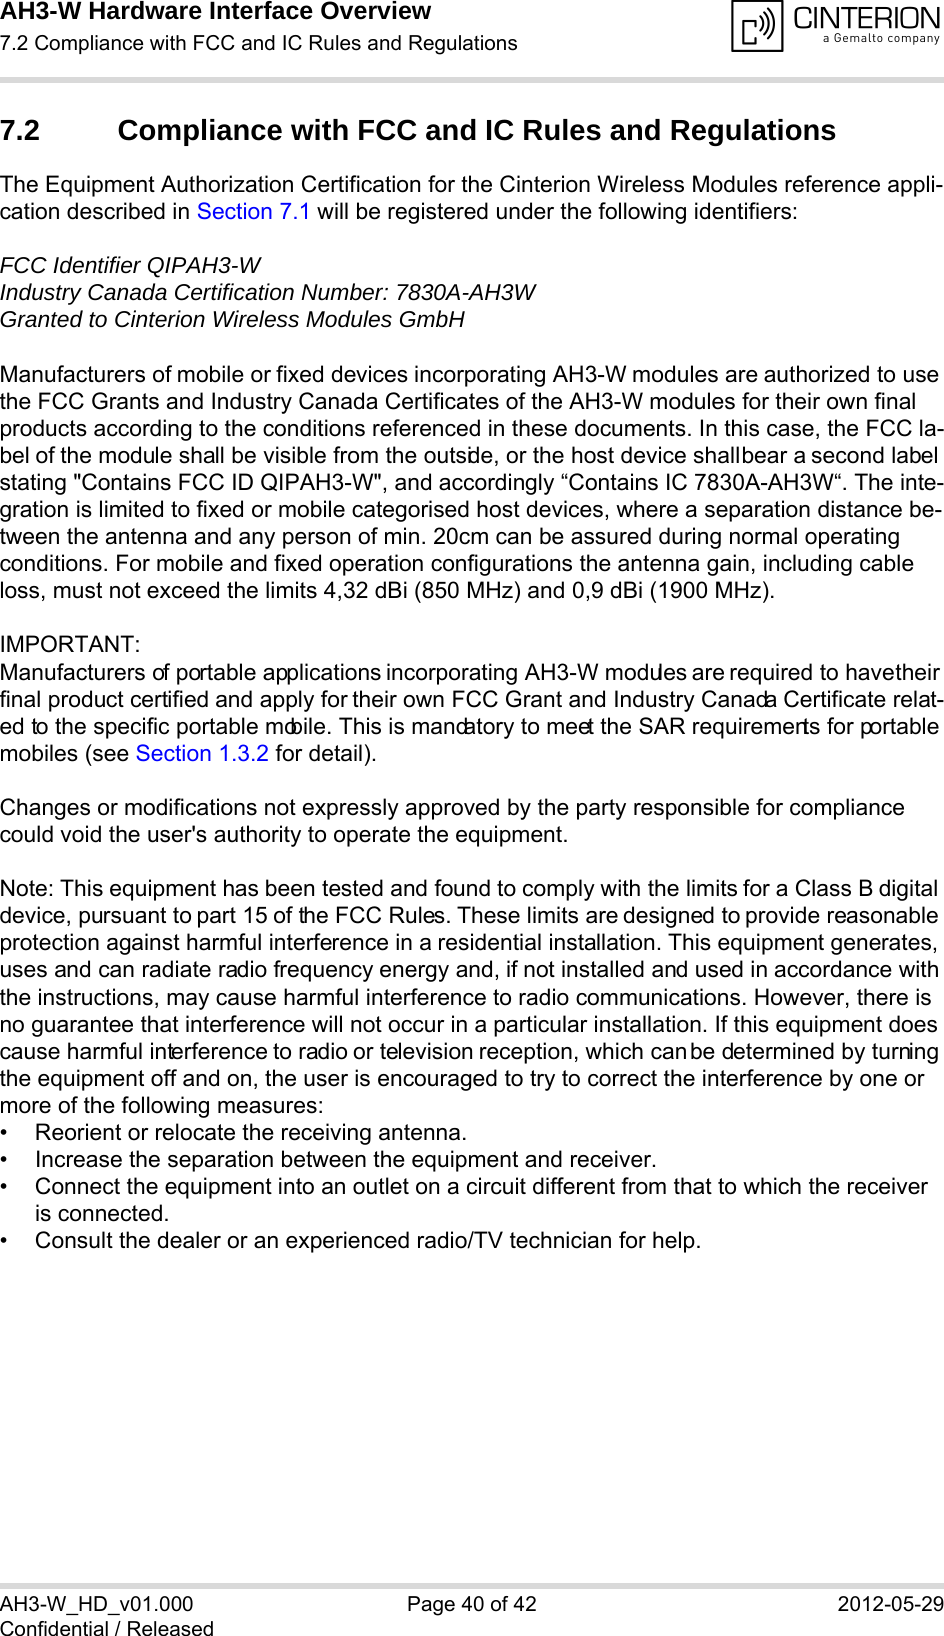 AH3-W Hardware Interface Overview7.2 Compliance with FCC and IC Rules and Regulations40AH3-W_HD_v01.000 Page 40 of 42 2012-05-29Confidential / Released7.2 Compliance with FCC and IC Rules and Regulations The Equipment Authorization Certification for the Cinterion Wireless Modules reference appli-cation described in Section 7.1 will be registered under the following identifiers:FCC Identifier QIPAH3-WIndustry Canada Certification Number: 7830A-AH3WGranted to Cinterion Wireless Modules GmbH Manufacturers of mobile or fixed devices incorporating AH3-W modules are authorized to use the FCC Grants and Industry Canada Certificates of the AH3-W modules for their own final products according to the conditions referenced in these documents. In this case, the FCC la-bel of the module shall be visible from the outside, or the host device shall bear a second label stating &quot;Contains FCC ID QIPAH3-W&quot;, and accordingly “Contains IC 7830A-AH3W“. The inte-gration is limited to fixed or mobile categorised host devices, where a separation distance be-tween the antenna and any person of min. 20cm can be assured during normal operating conditions. For mobile and fixed operation configurations the antenna gain, including cable loss, must not exceed the limits 4,32 dBi (850 MHz) and 0,9 dBi (1900 MHz).IMPORTANT:Manufacturers of portable applications incorporating AH3-W modules are required to have their final product certified and apply for their own FCC Grant and Industry Canada Certificate relat-ed to the specific portable mobile. This is mandatory to meet the SAR requirements for portable mobiles (see Section 1.3.2 for detail).Changes or modifications not expressly approved by the party responsible for compliance could void the user&apos;s authority to operate the equipment.Note: This equipment has been tested and found to comply with the limits for a Class B digital device, pursuant to part 15 of the FCC Rules. These limits are designed to provide reasonable protection against harmful interference in a residential installation. This equipment generates, uses and can radiate radio frequency energy and, if not installed and used in accordance with the instructions, may cause harmful interference to radio communications. However, there is no guarantee that interference will not occur in a particular installation. If this equipment does cause harmful interference to radio or television reception, which can be determined by turning the equipment off and on, the user is encouraged to try to correct the interference by one or more of the following measures: • Reorient or relocate the receiving antenna. • Increase the separation between the equipment and receiver. • Connect the equipment into an outlet on a circuit different from that to which the receiver is connected. • Consult the dealer or an experienced radio/TV technician for help.